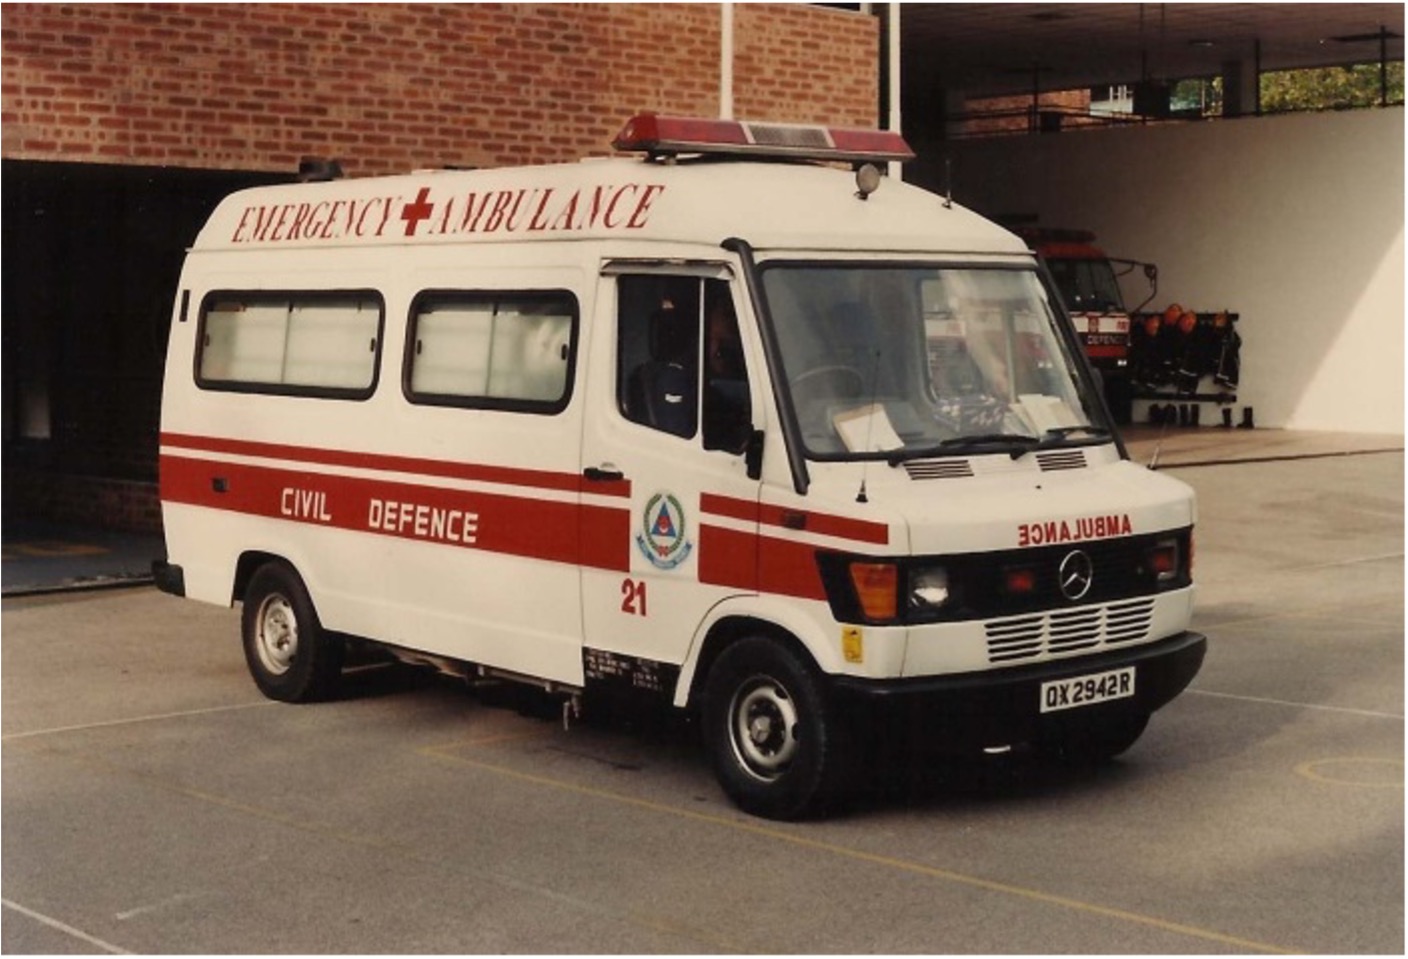 The Mercedes Benz 3103350 (1993) was one of the models for SCDF’s third-generation ambulances.